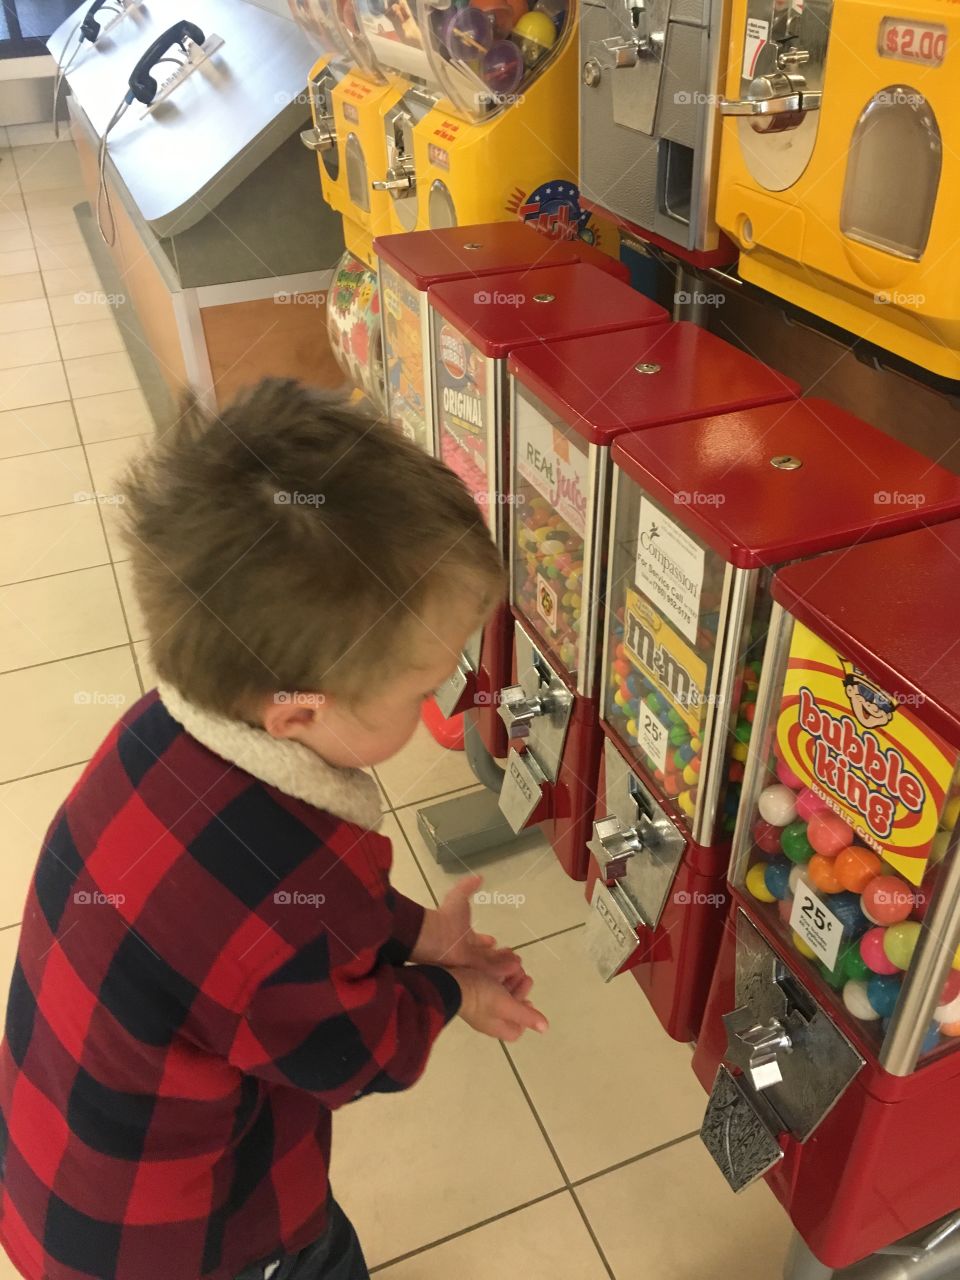 Getting candy from the candy machine 